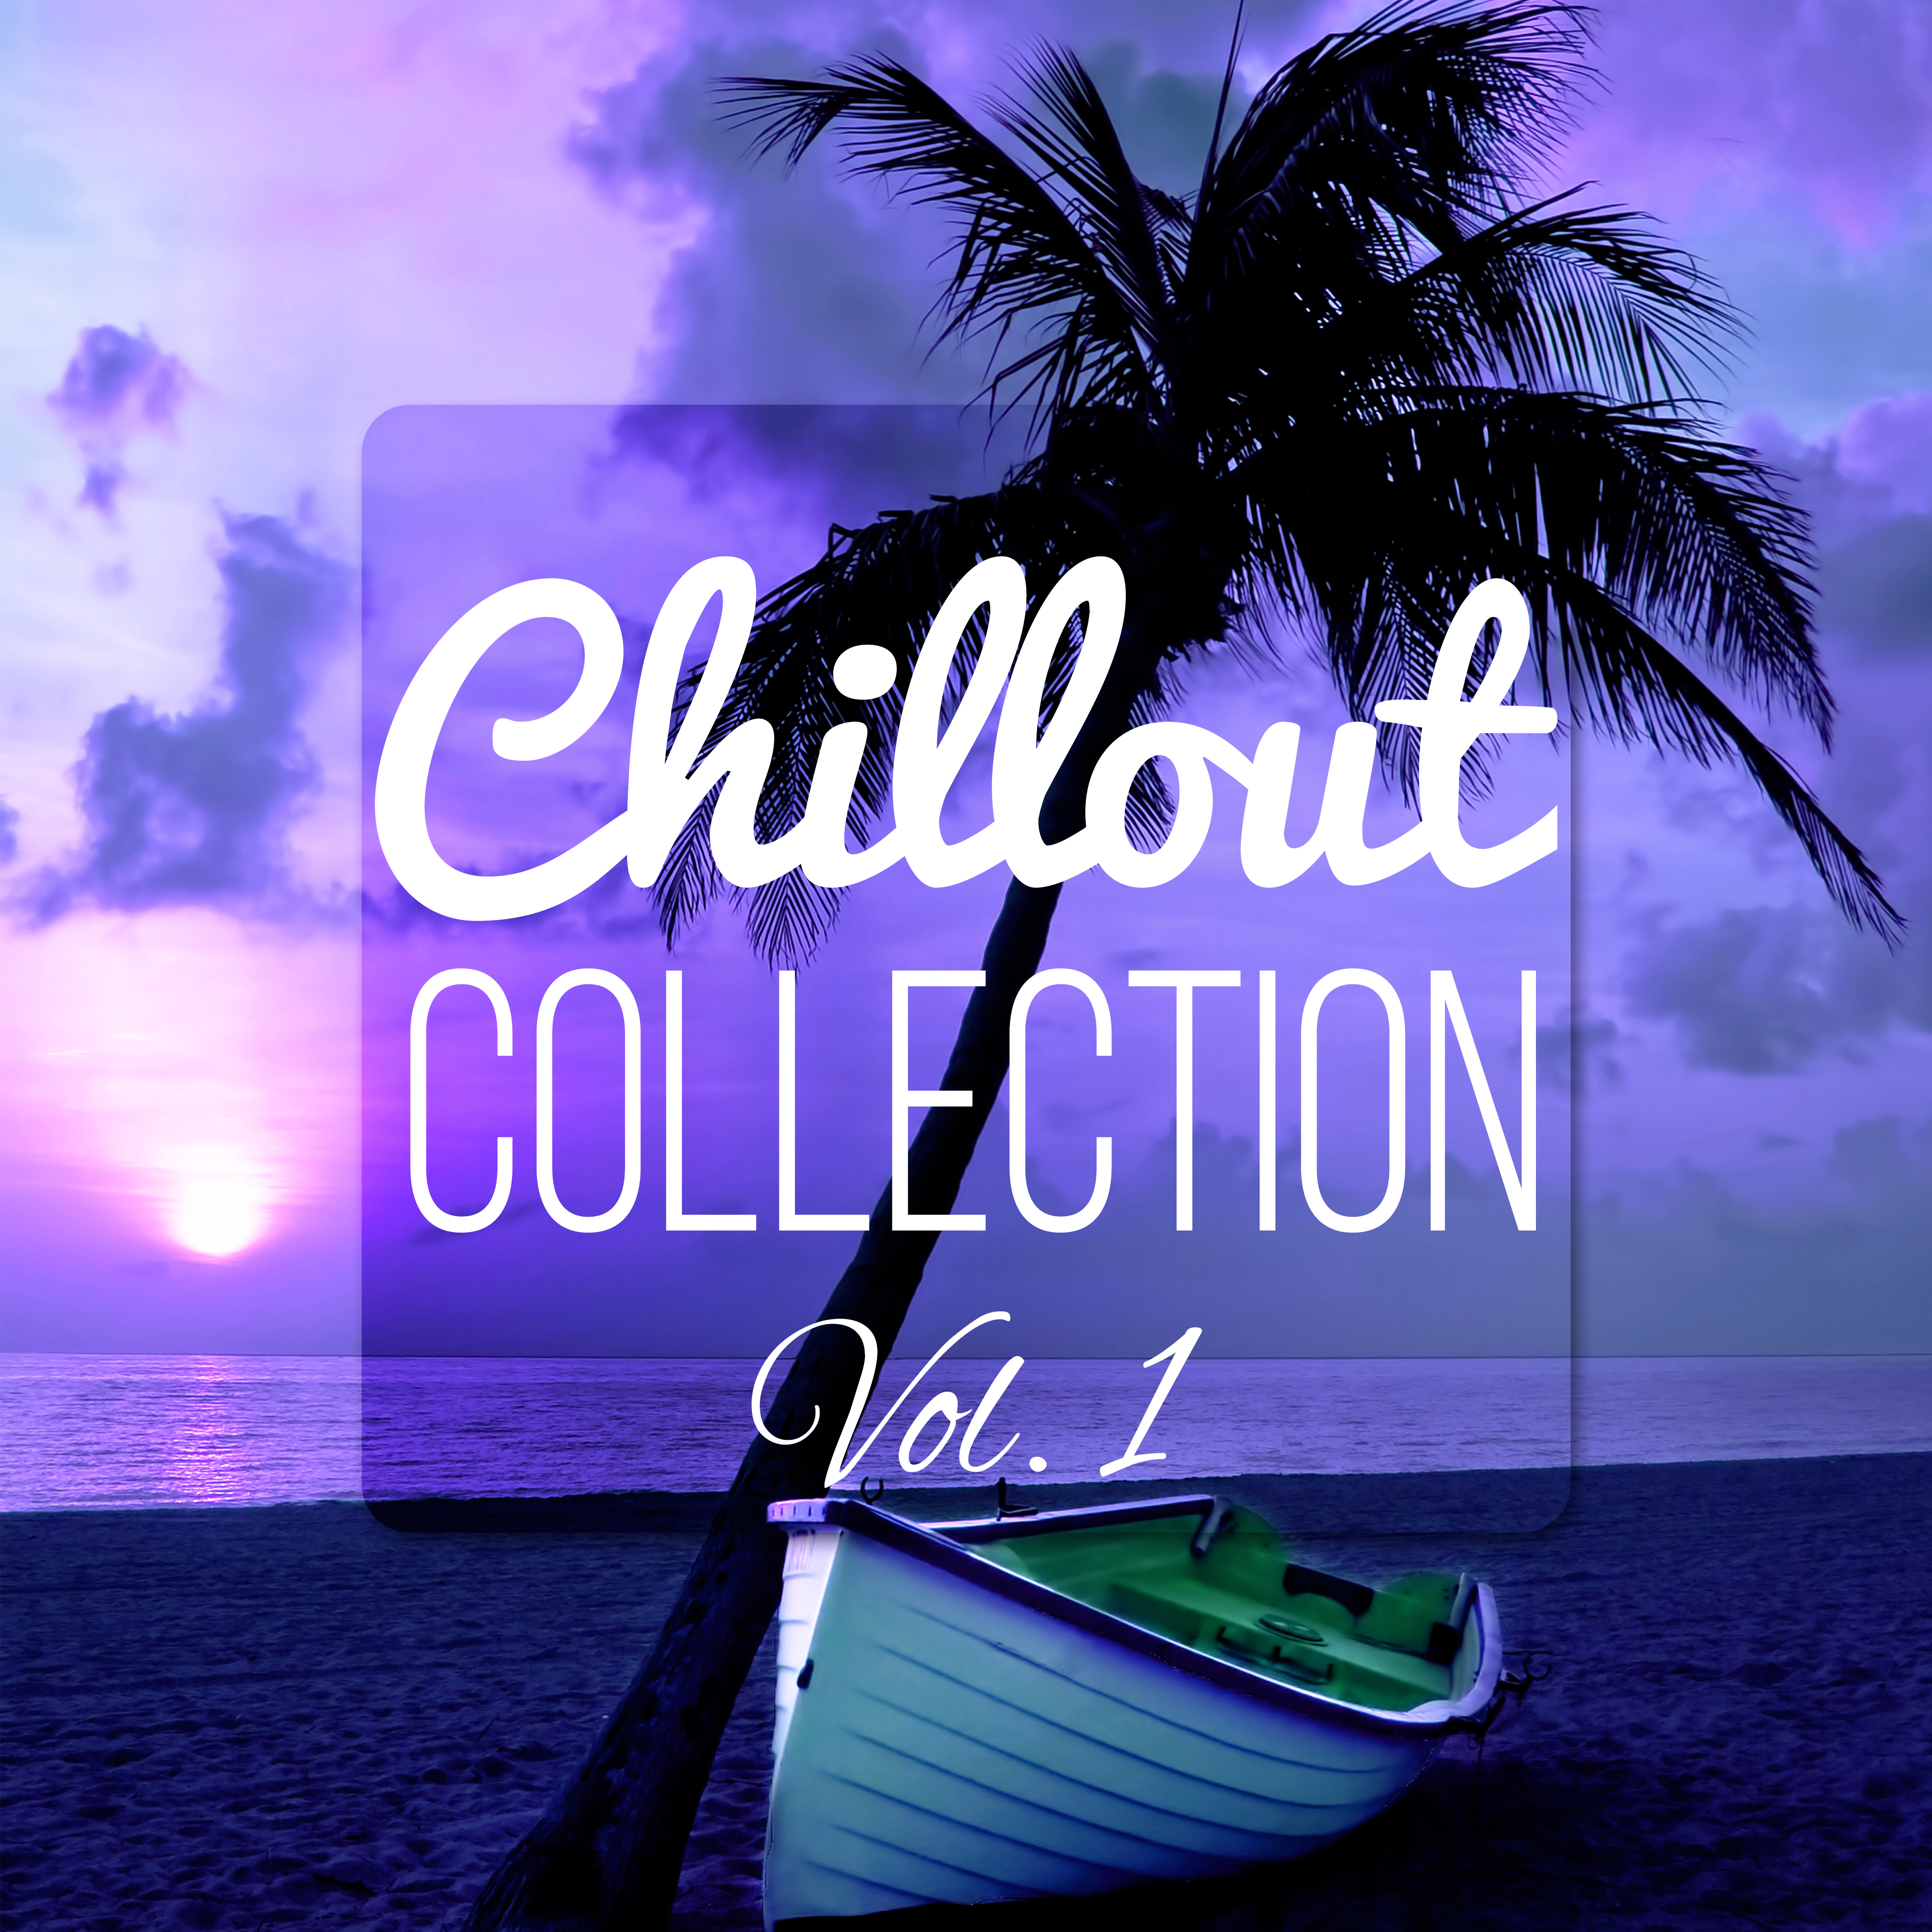 Chillout Collection Vol. 1 - Summertime Beach Party Electronic Music, Ministry of Sound, Lounge Music, Easy Listening, Serene Music, Endless Music